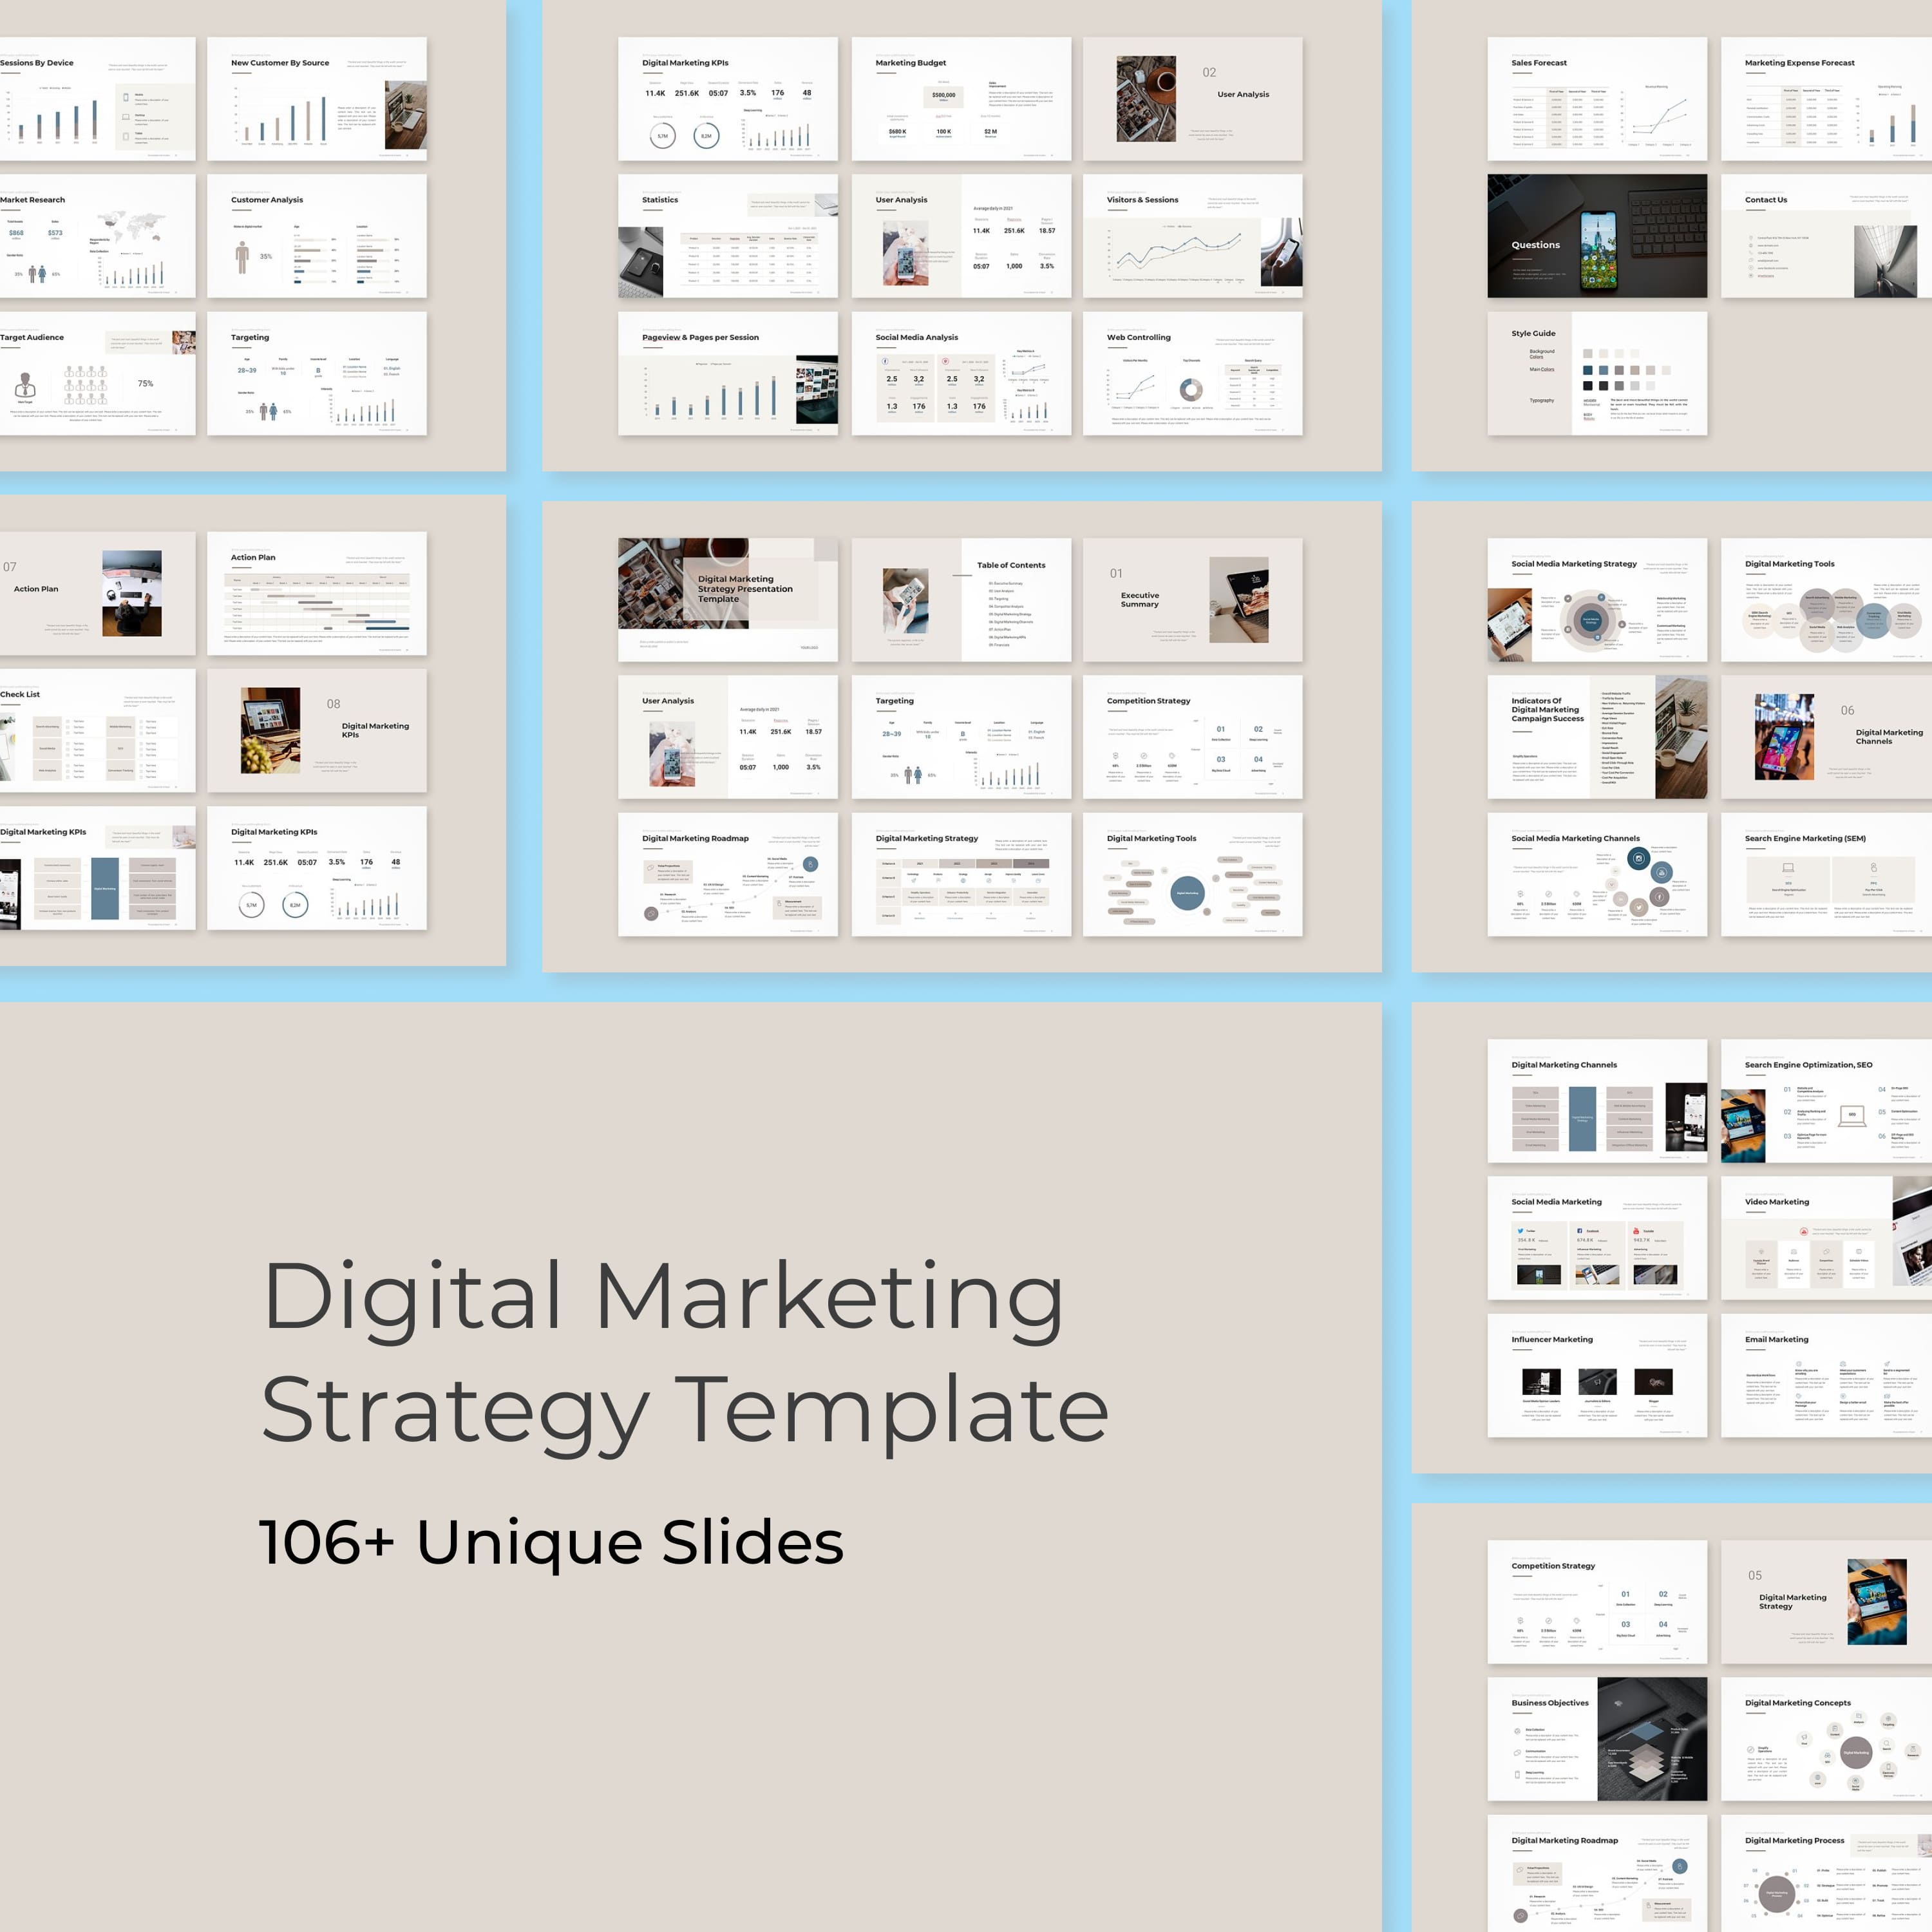 You can use this template for processes such as user analysis, targeting, SEO, content marketing, social media marketing, video marketing, viral marketing, influencer marketing, email marketing, KPIs, budget, and many more.